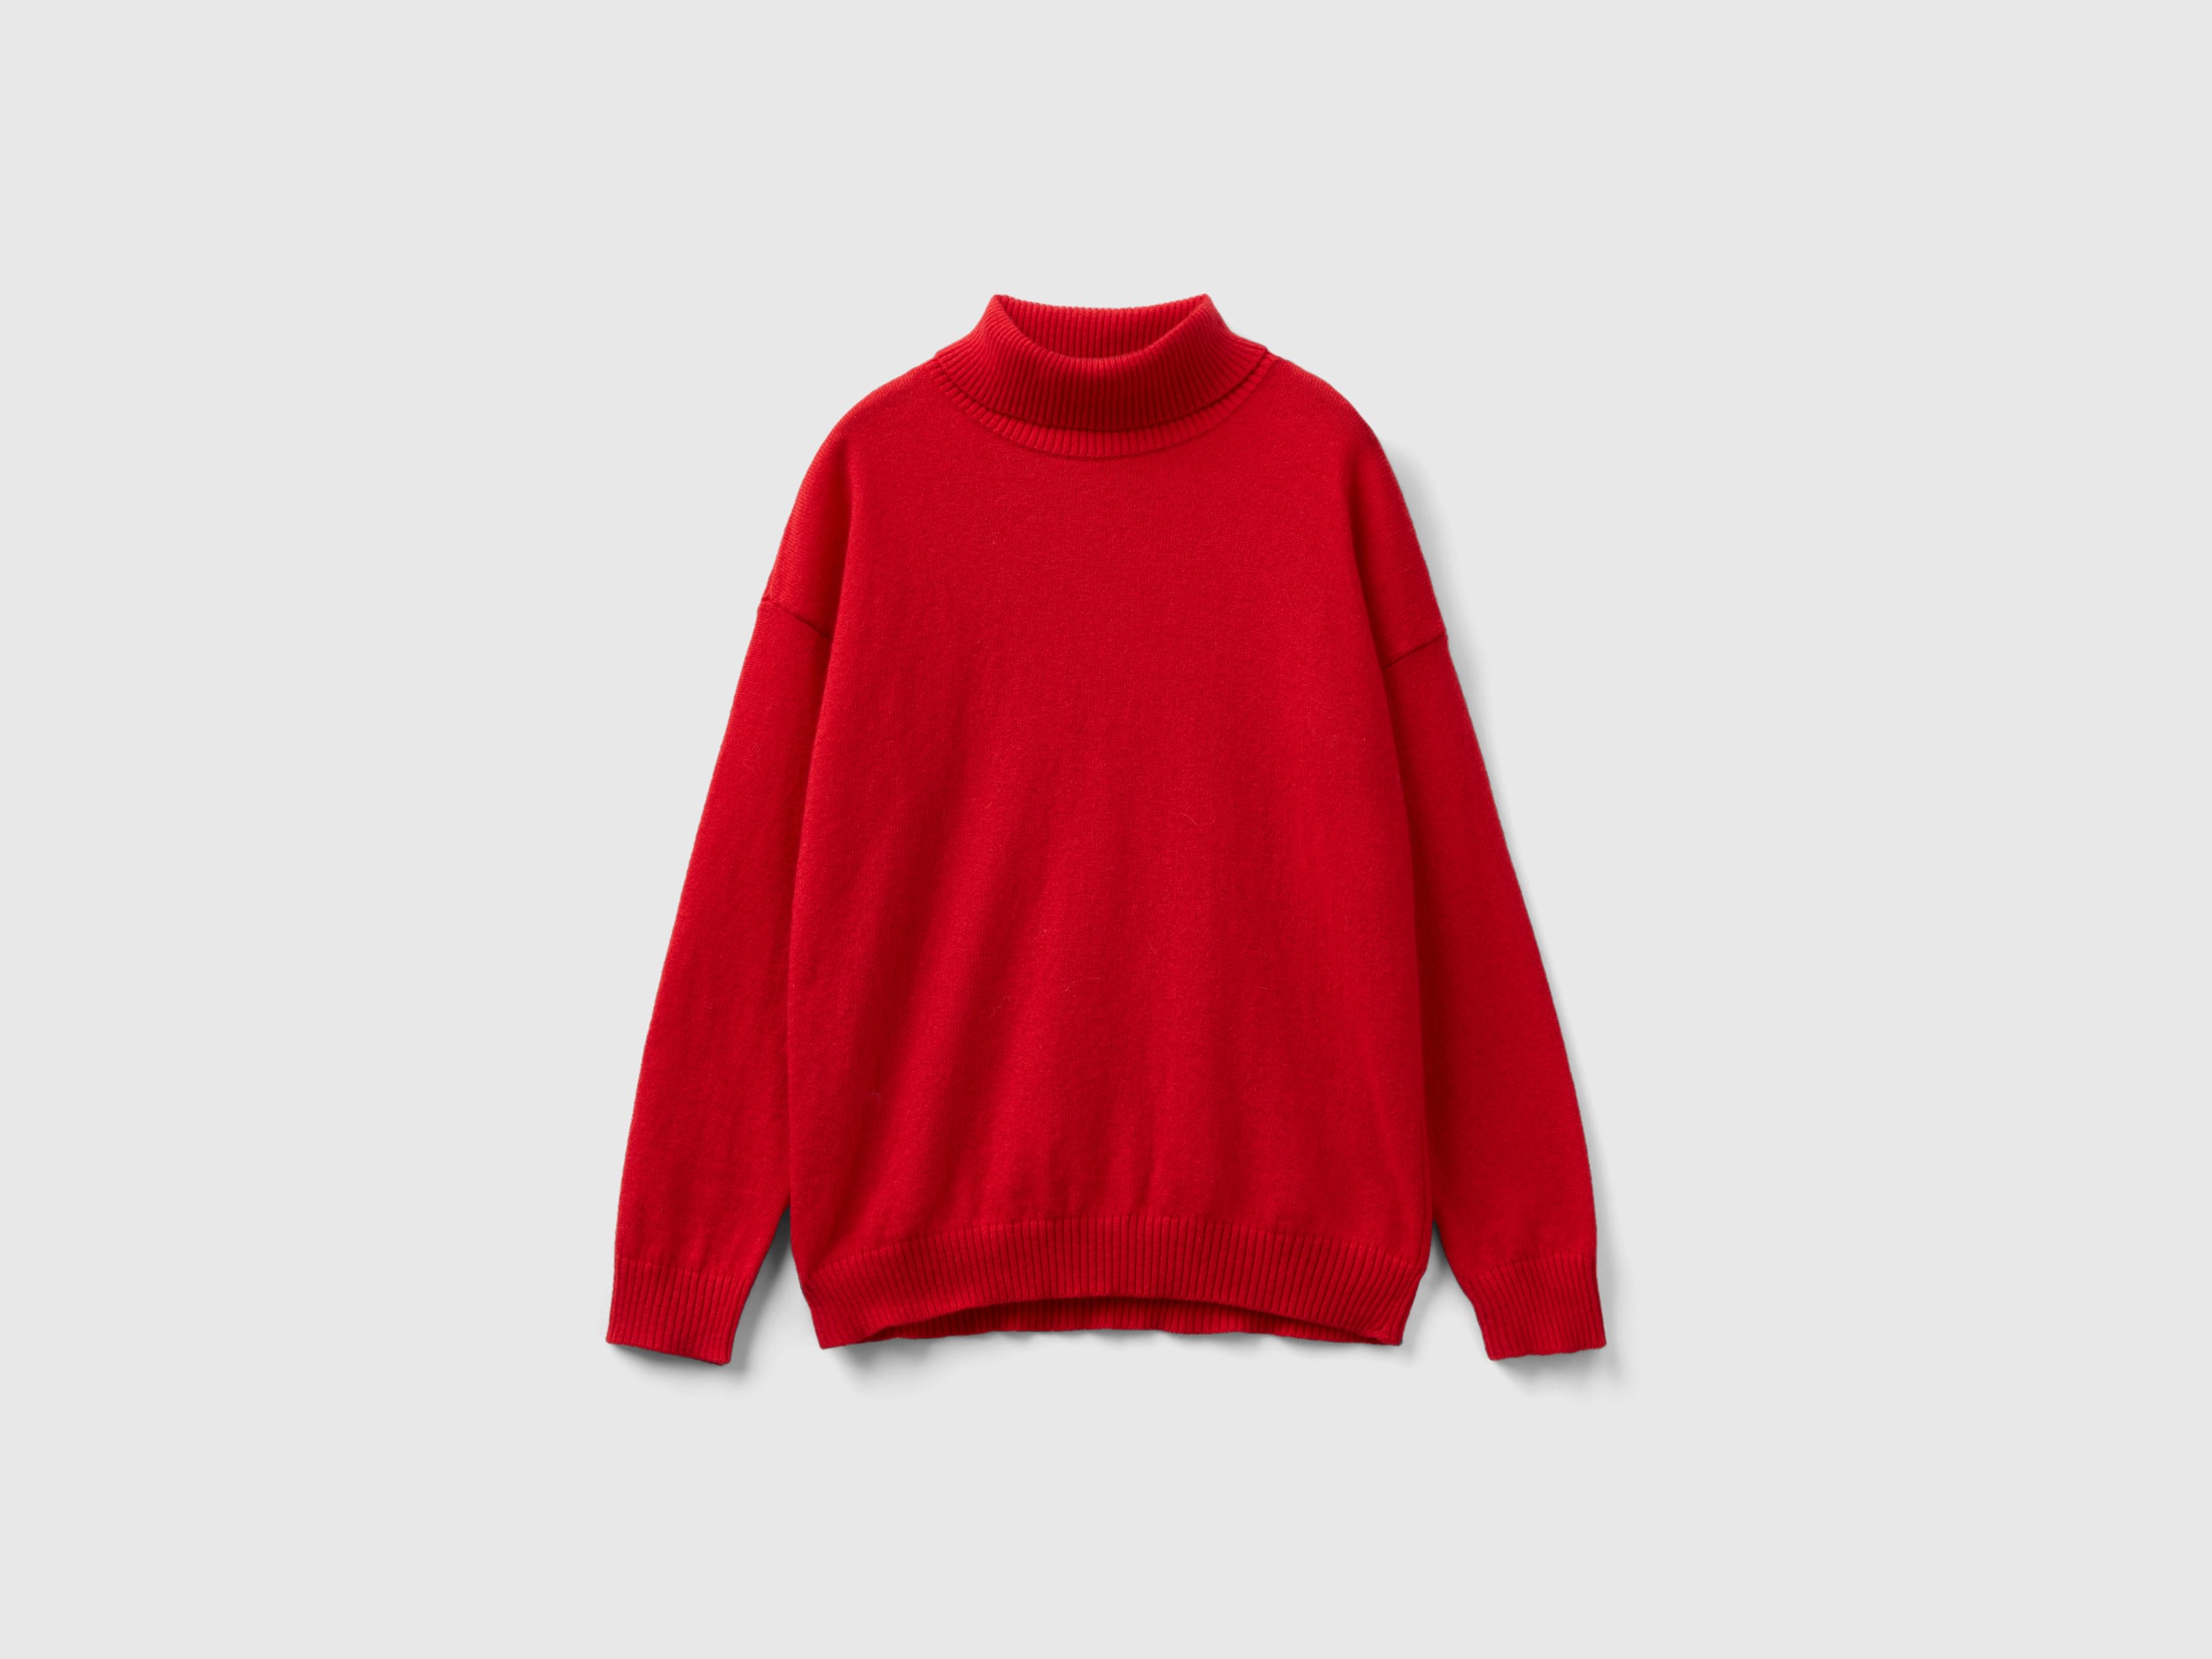 Benetton, Turtleneck Sweater In Cashmere And Wool Blend, size 2XL, Red, Kids